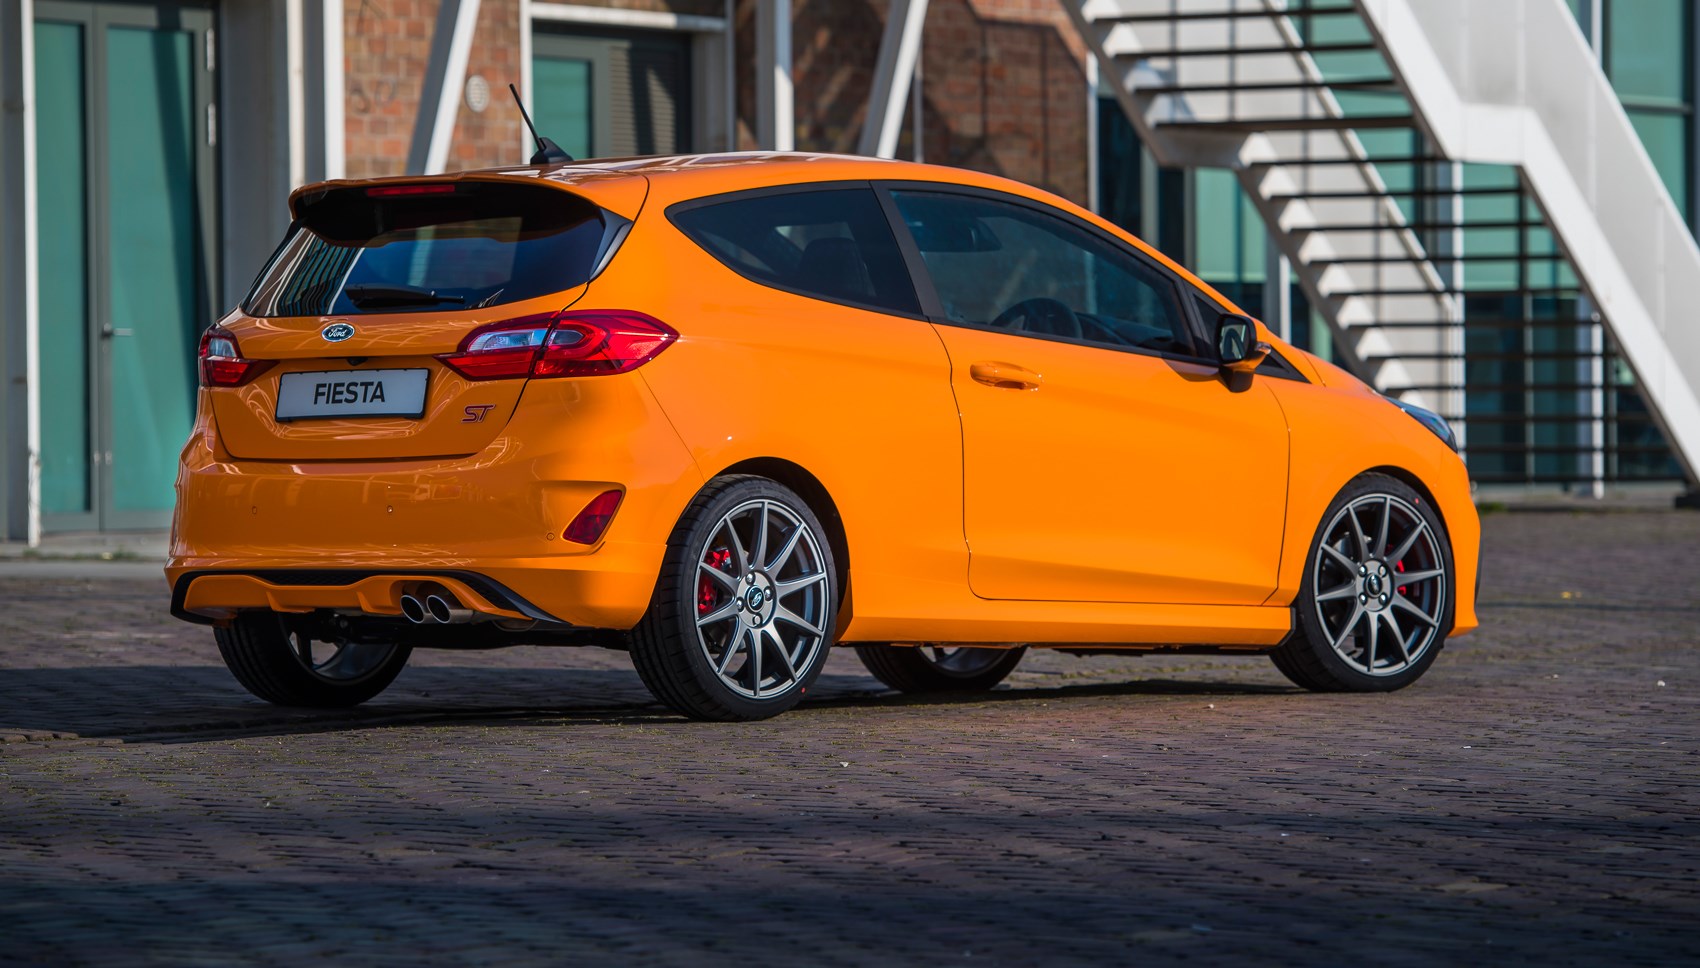 Ford Fiesta ST (2020) review: hot hatch hero | CAR Magazine